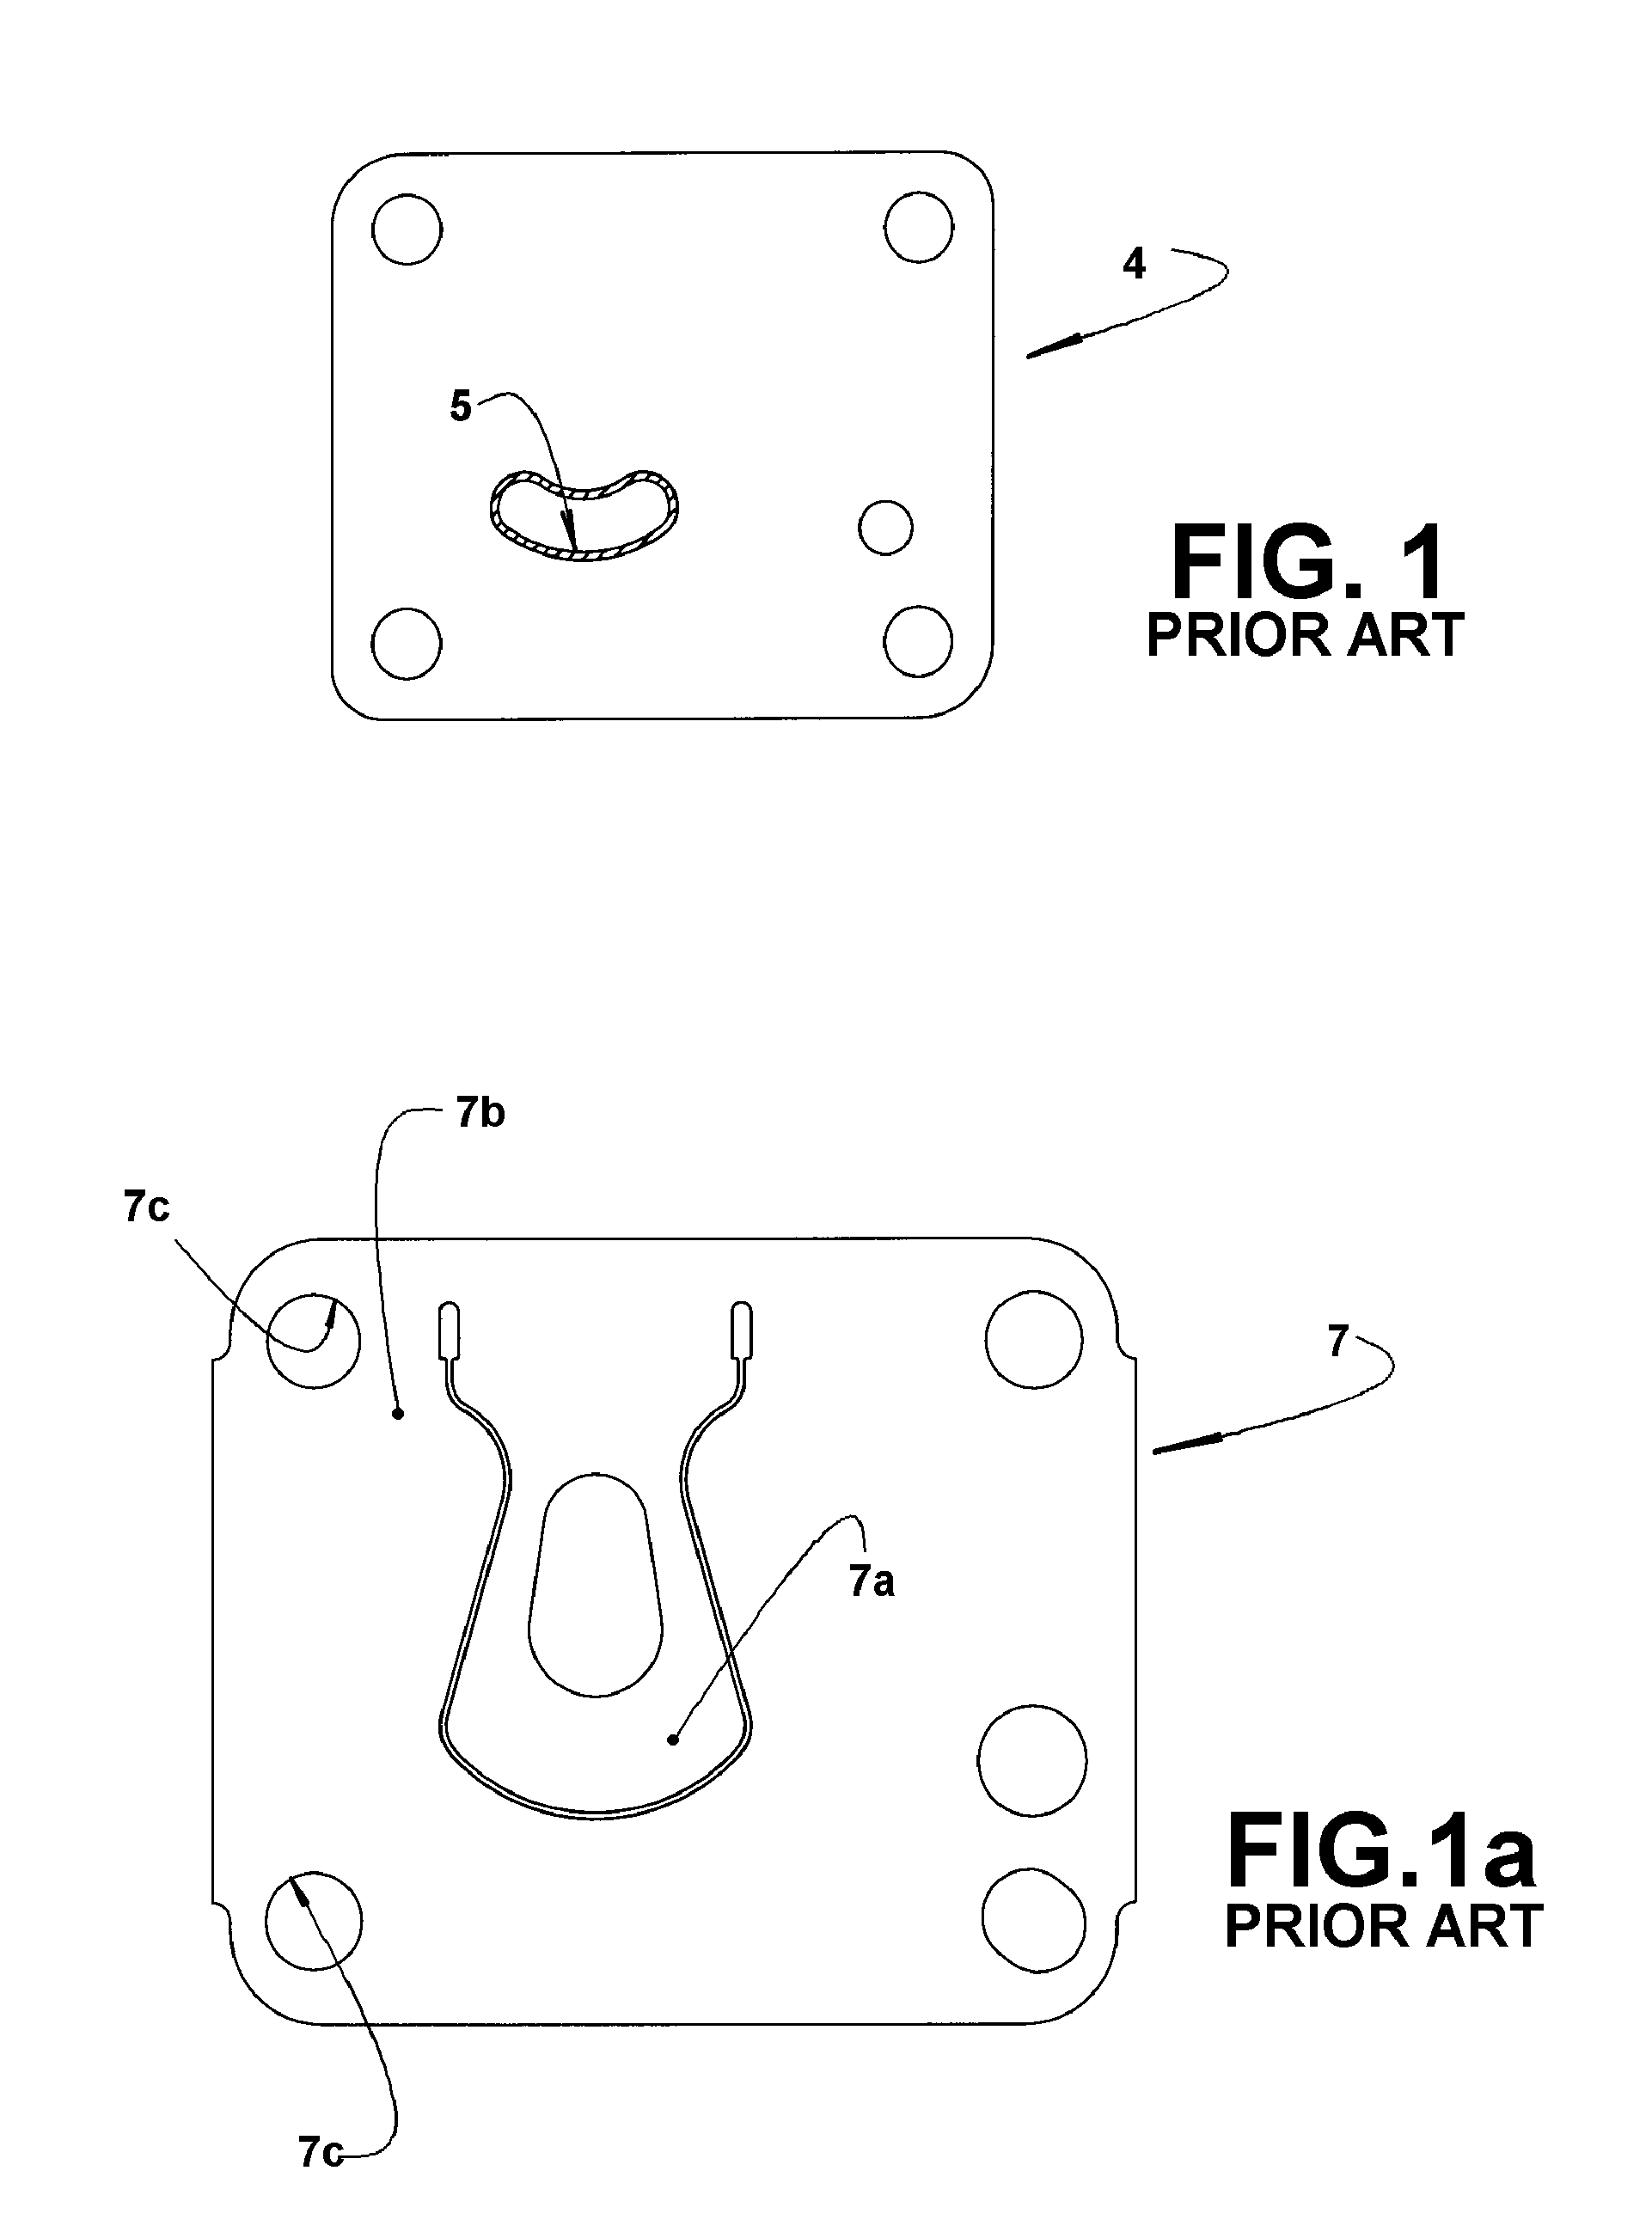 Process for mounting a valve in a refrigeration compressor